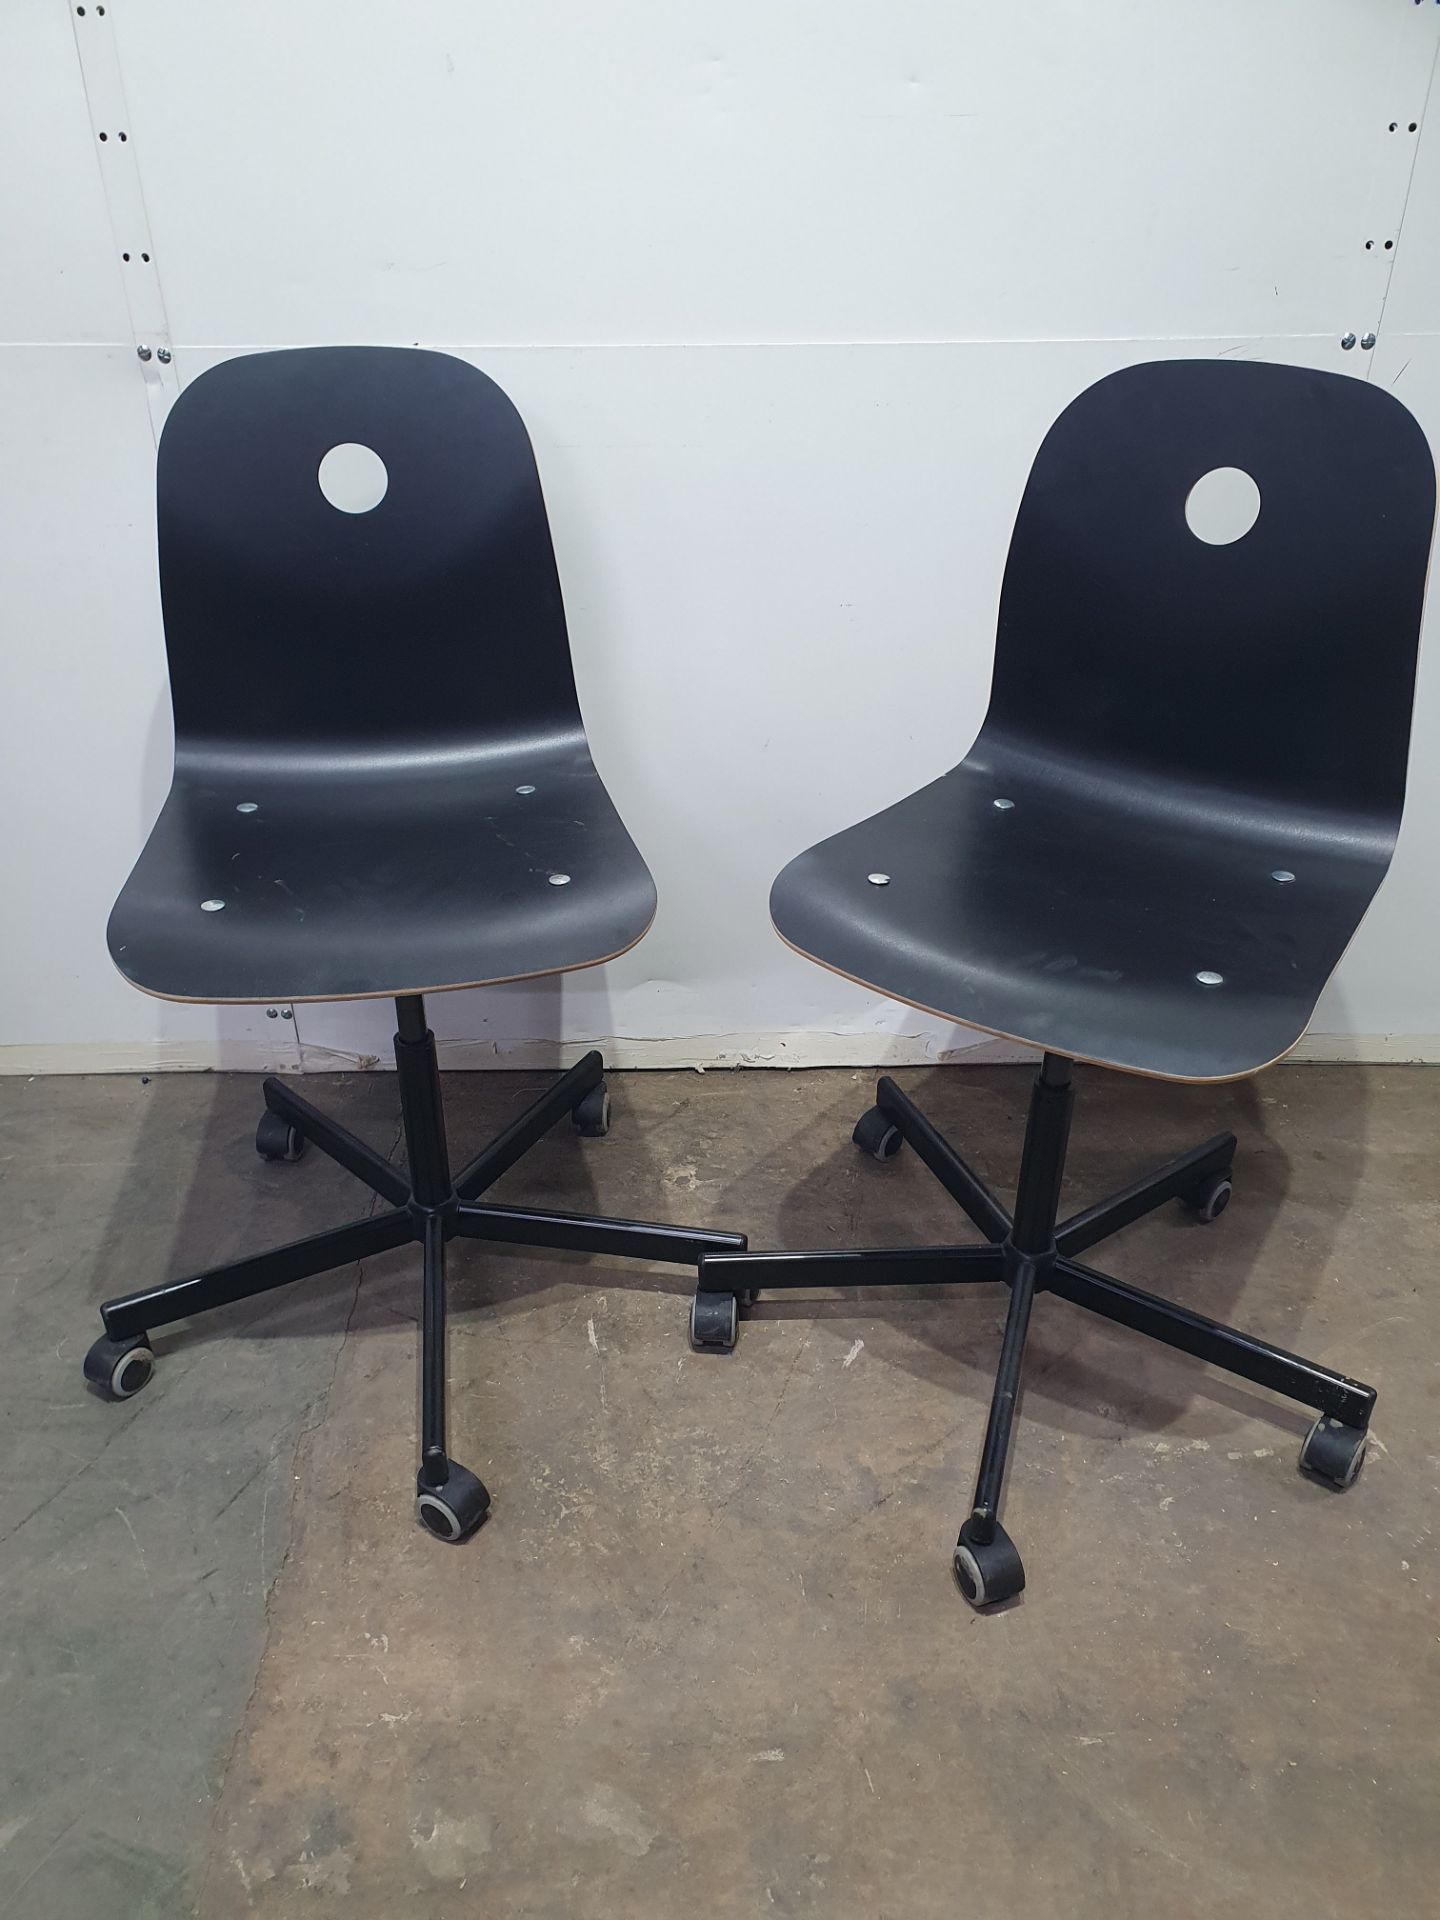 2 x Black Wooden Height Adjustable Chairs on Wheels